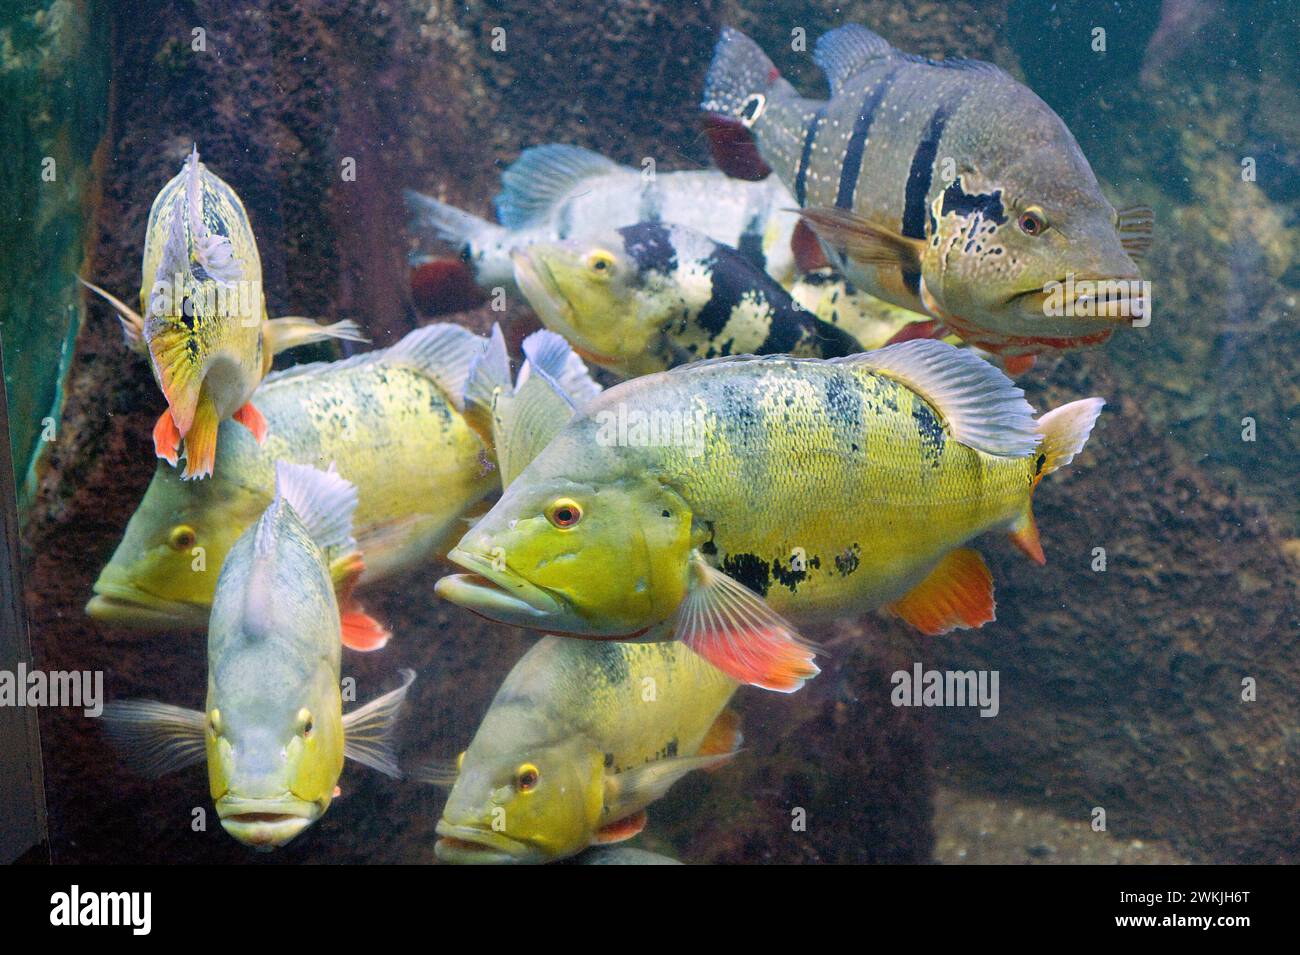 Butterfly peacock bass (Cichla ocellaris) is a fresh water carnivorous fish native to Amazon and Orinoco rivers. Stock Photo